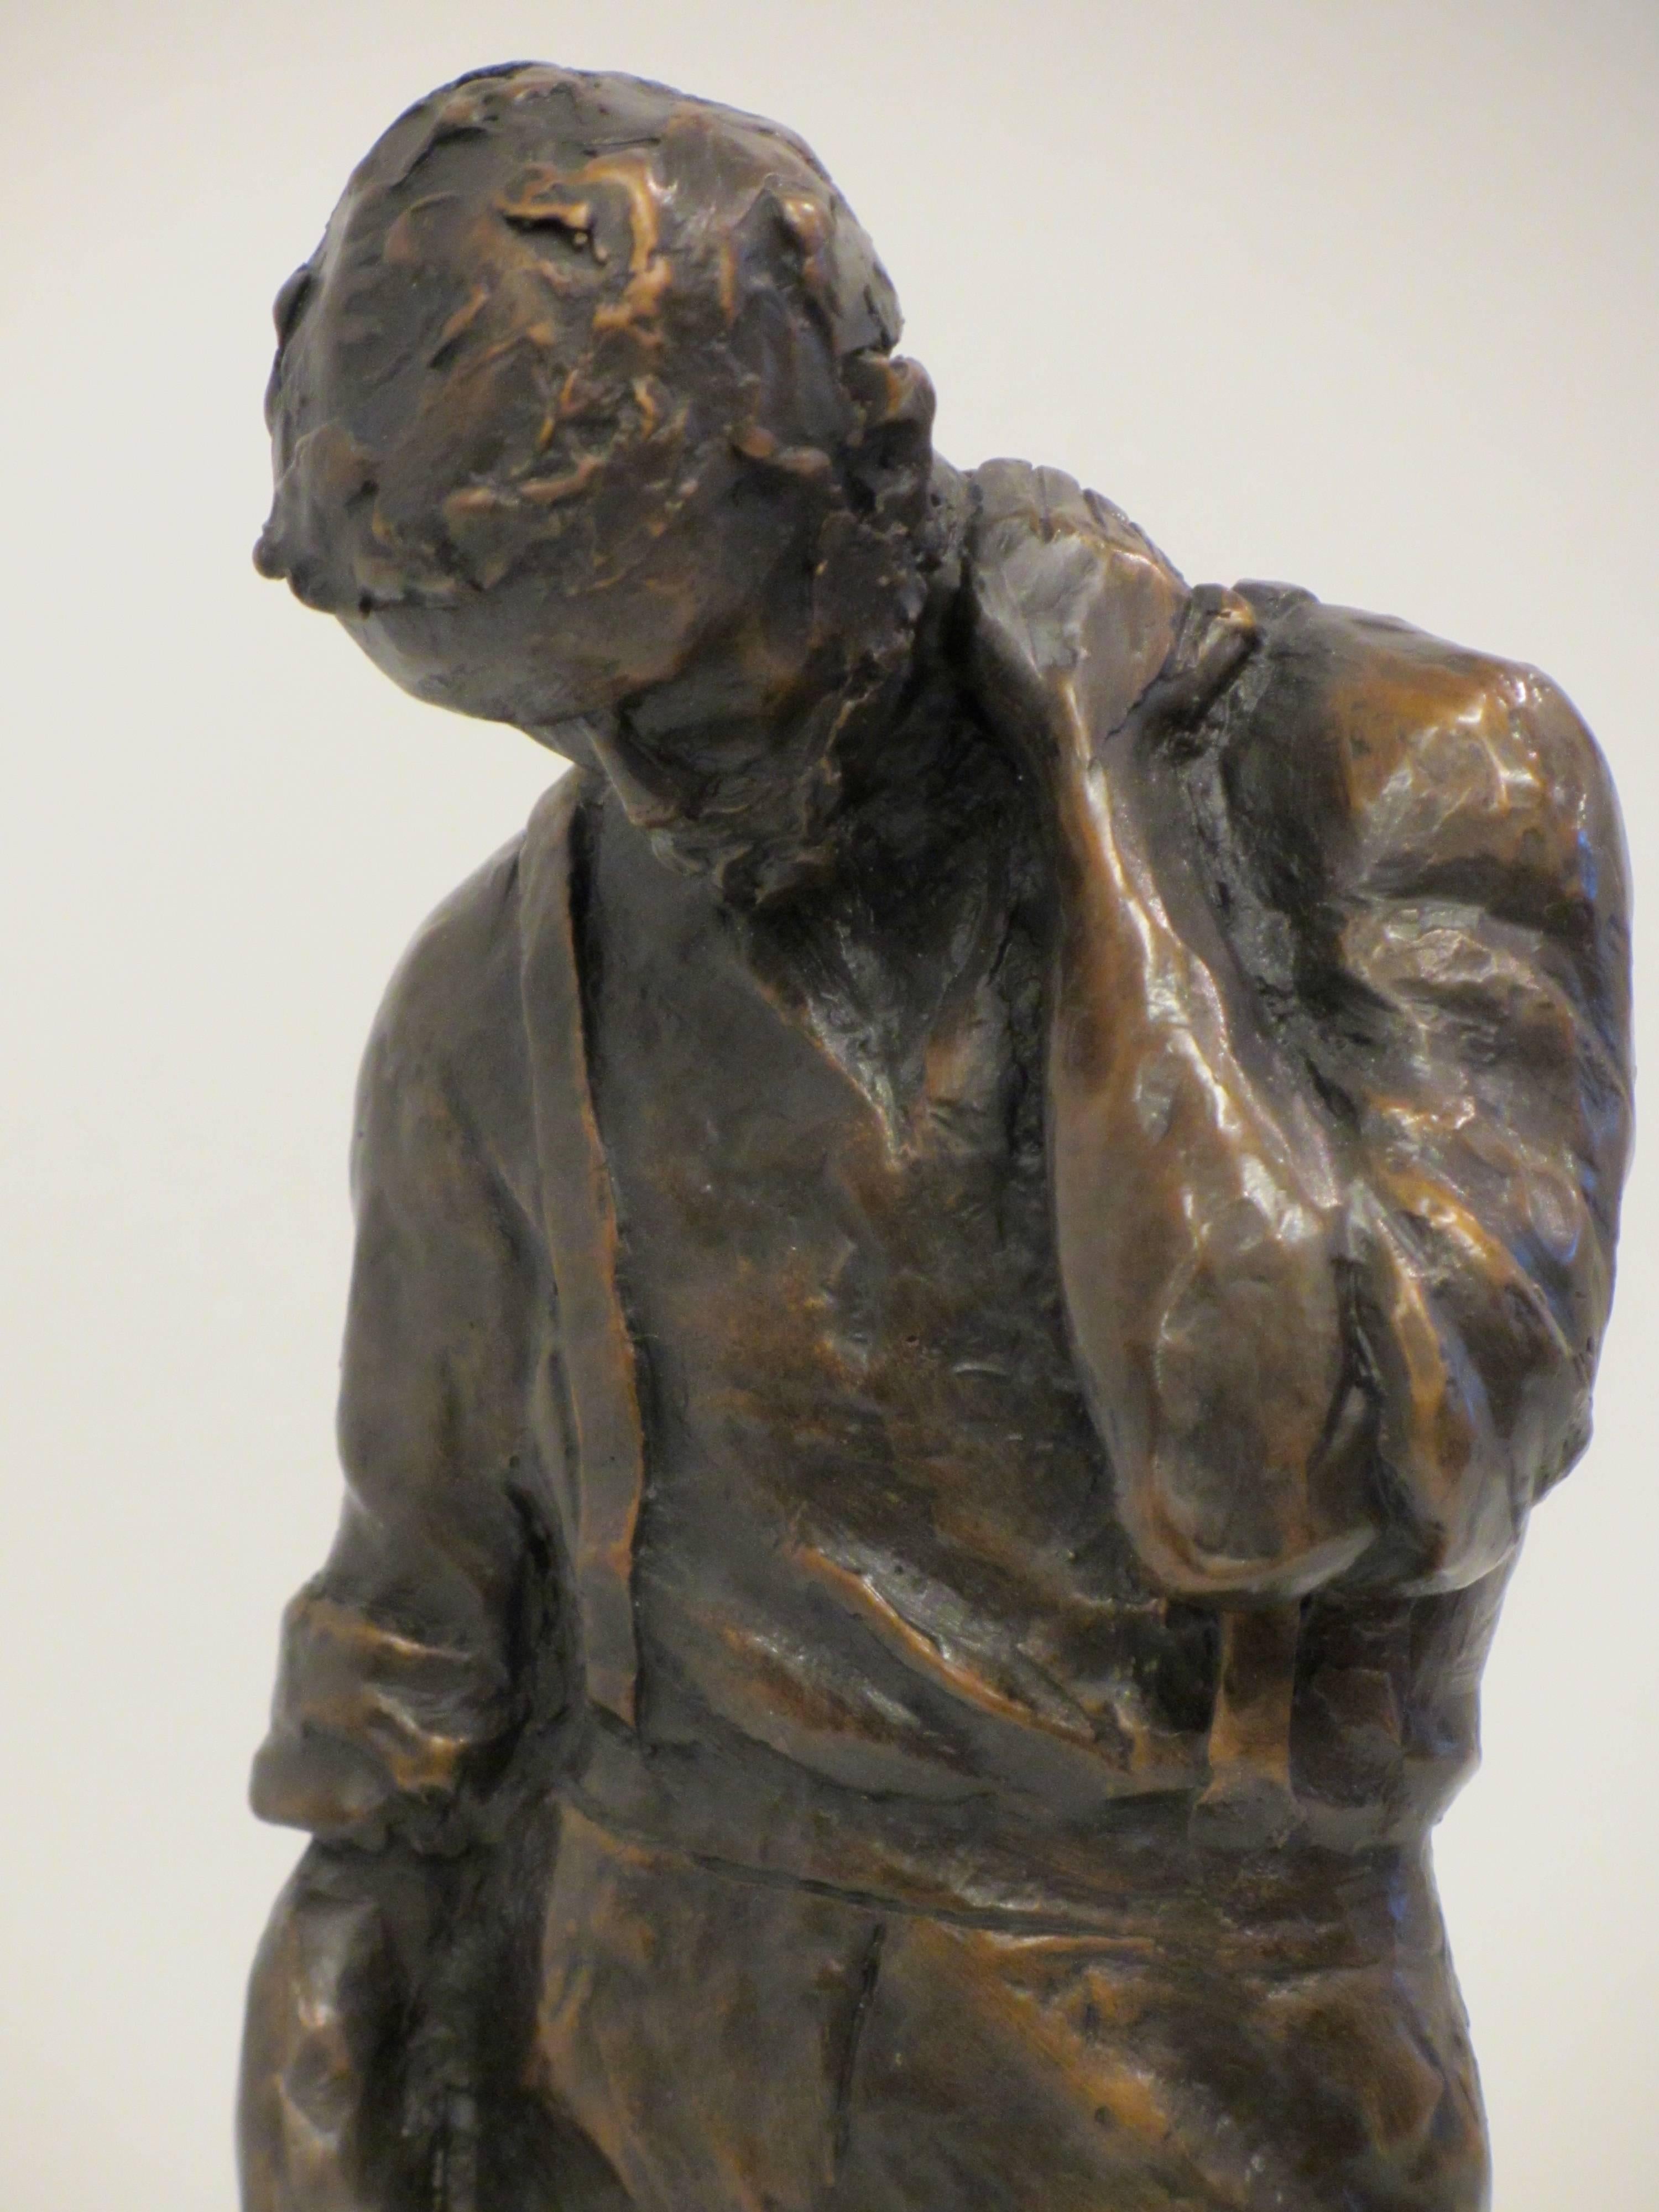 Contemporary 'Tom Wills' Bronze Sculpture by Martin Tighe 2011 For Sale